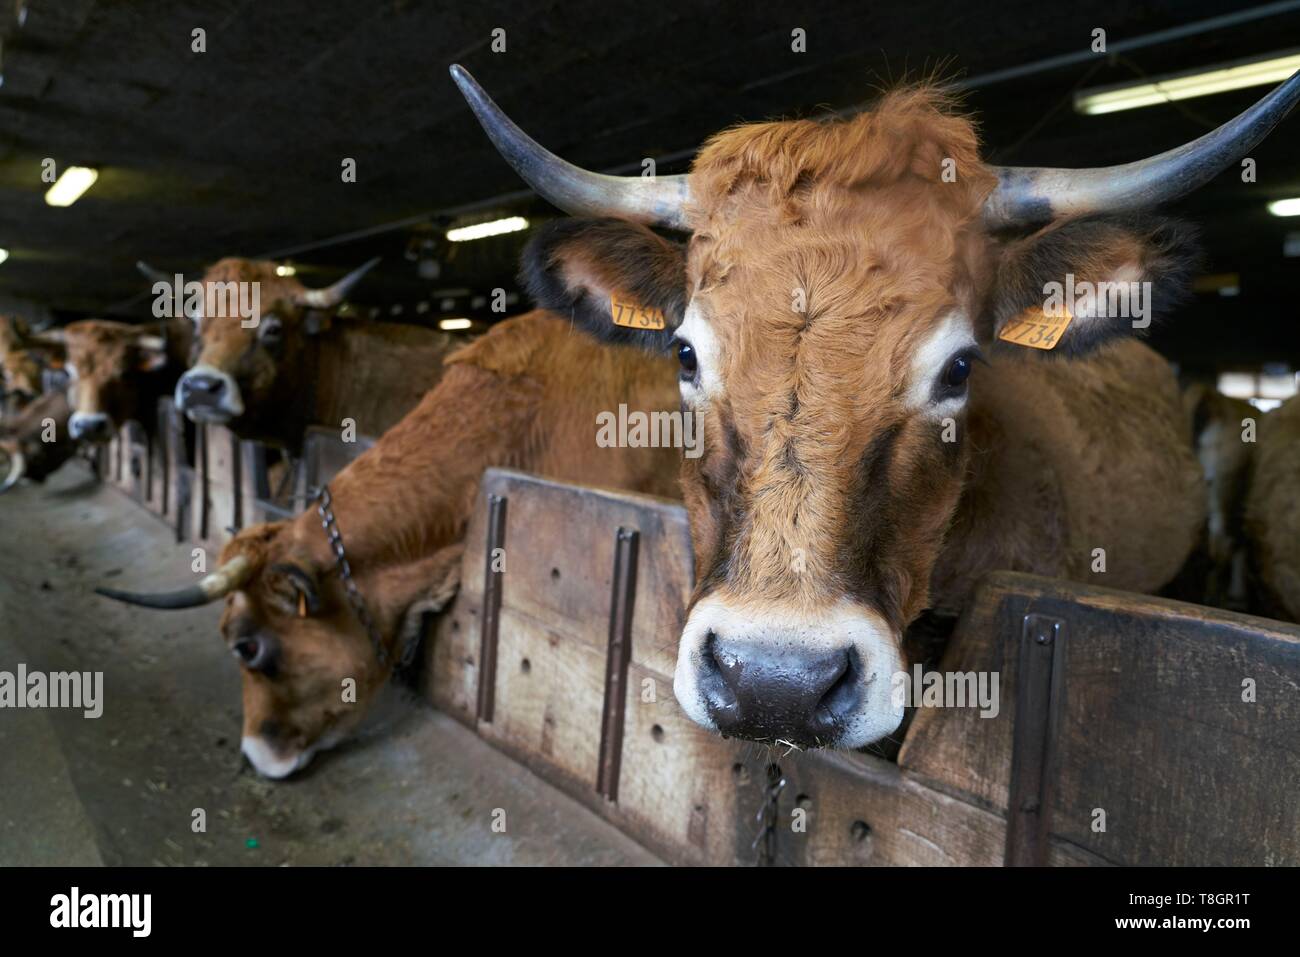 France, Aveyron, Laguiole, Patrick Mouliade, BFA President and his wife Nadege Aubrac cow breeders, cowshed Stock Photo